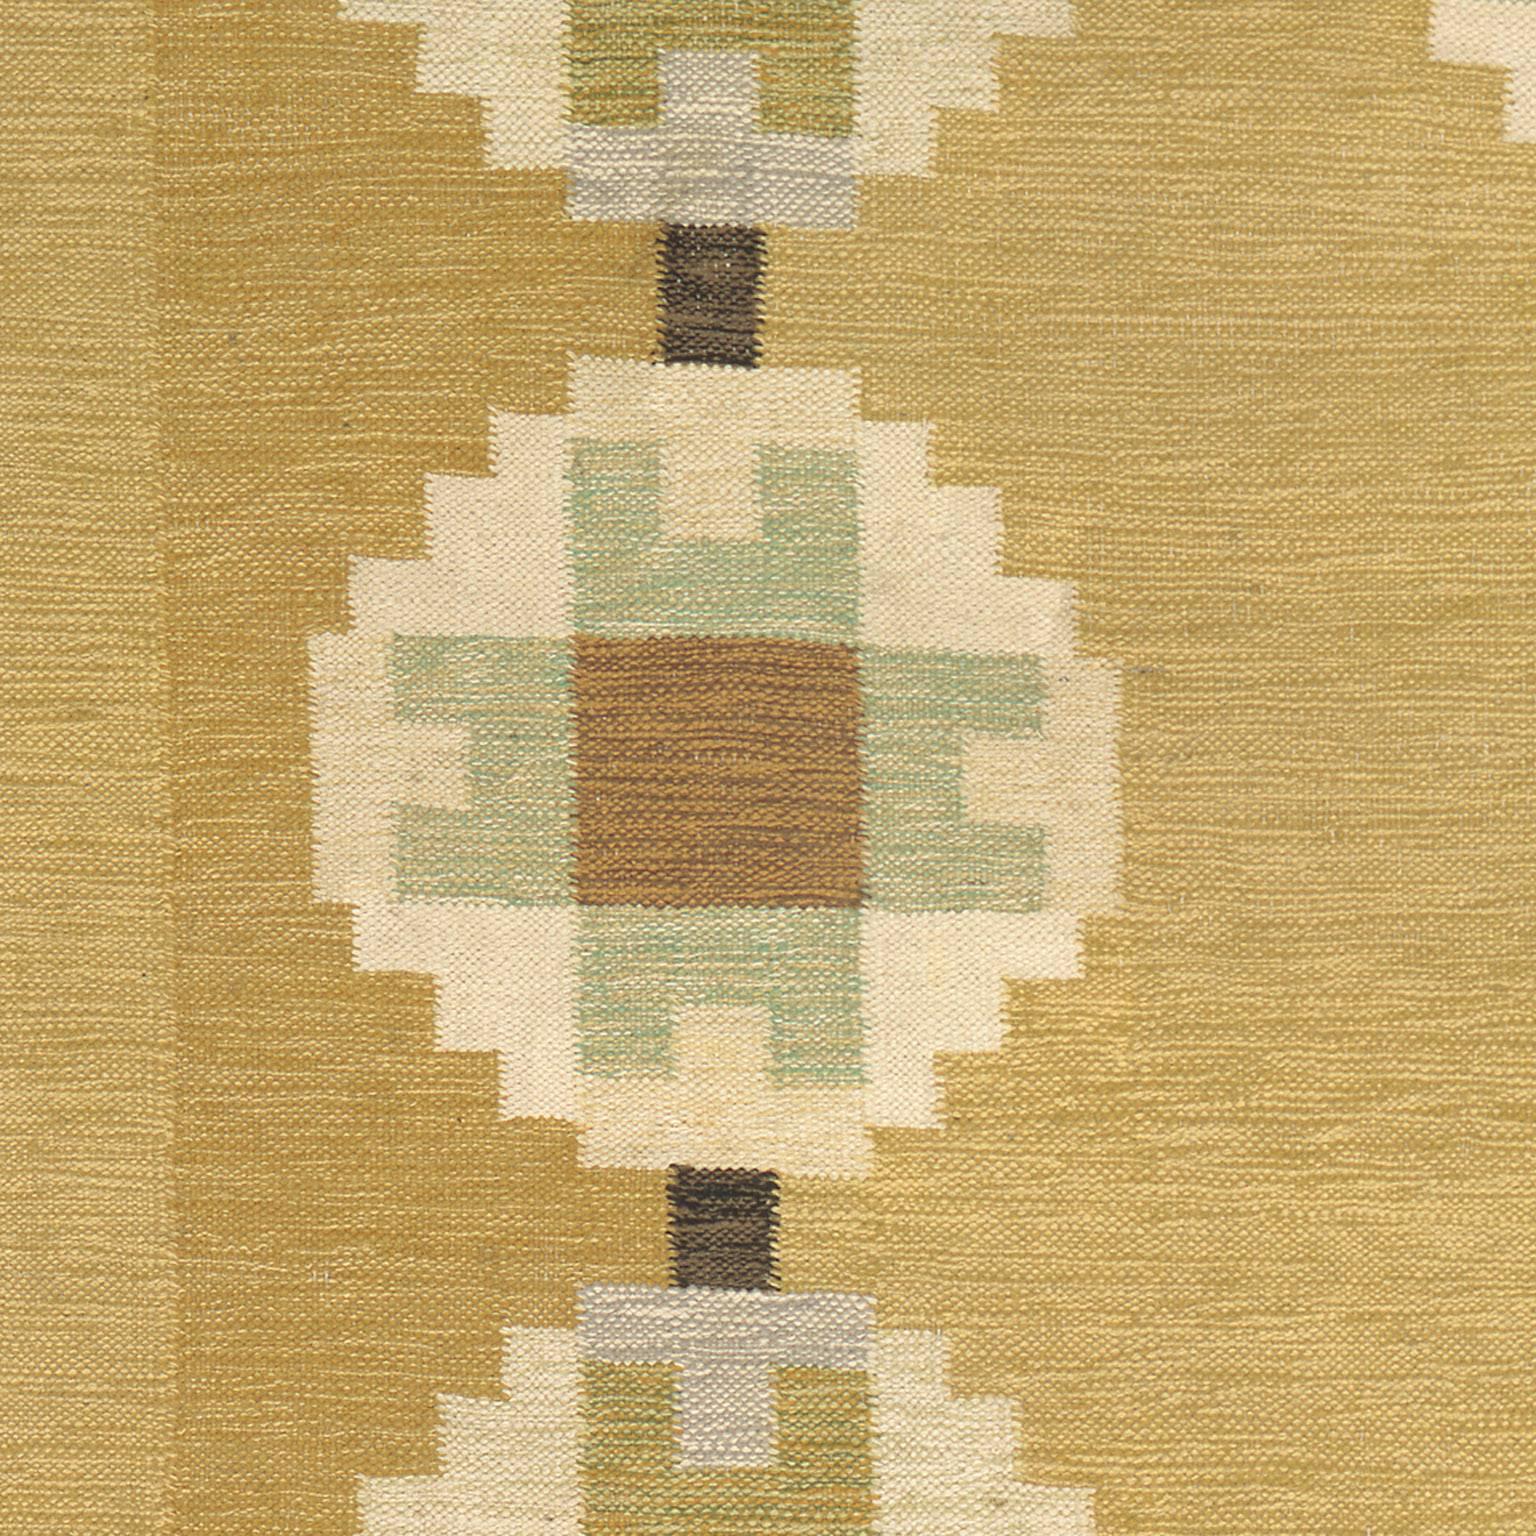 Hand-Woven Mid 20th Century Swedish Flat-Weave Carpet For Sale